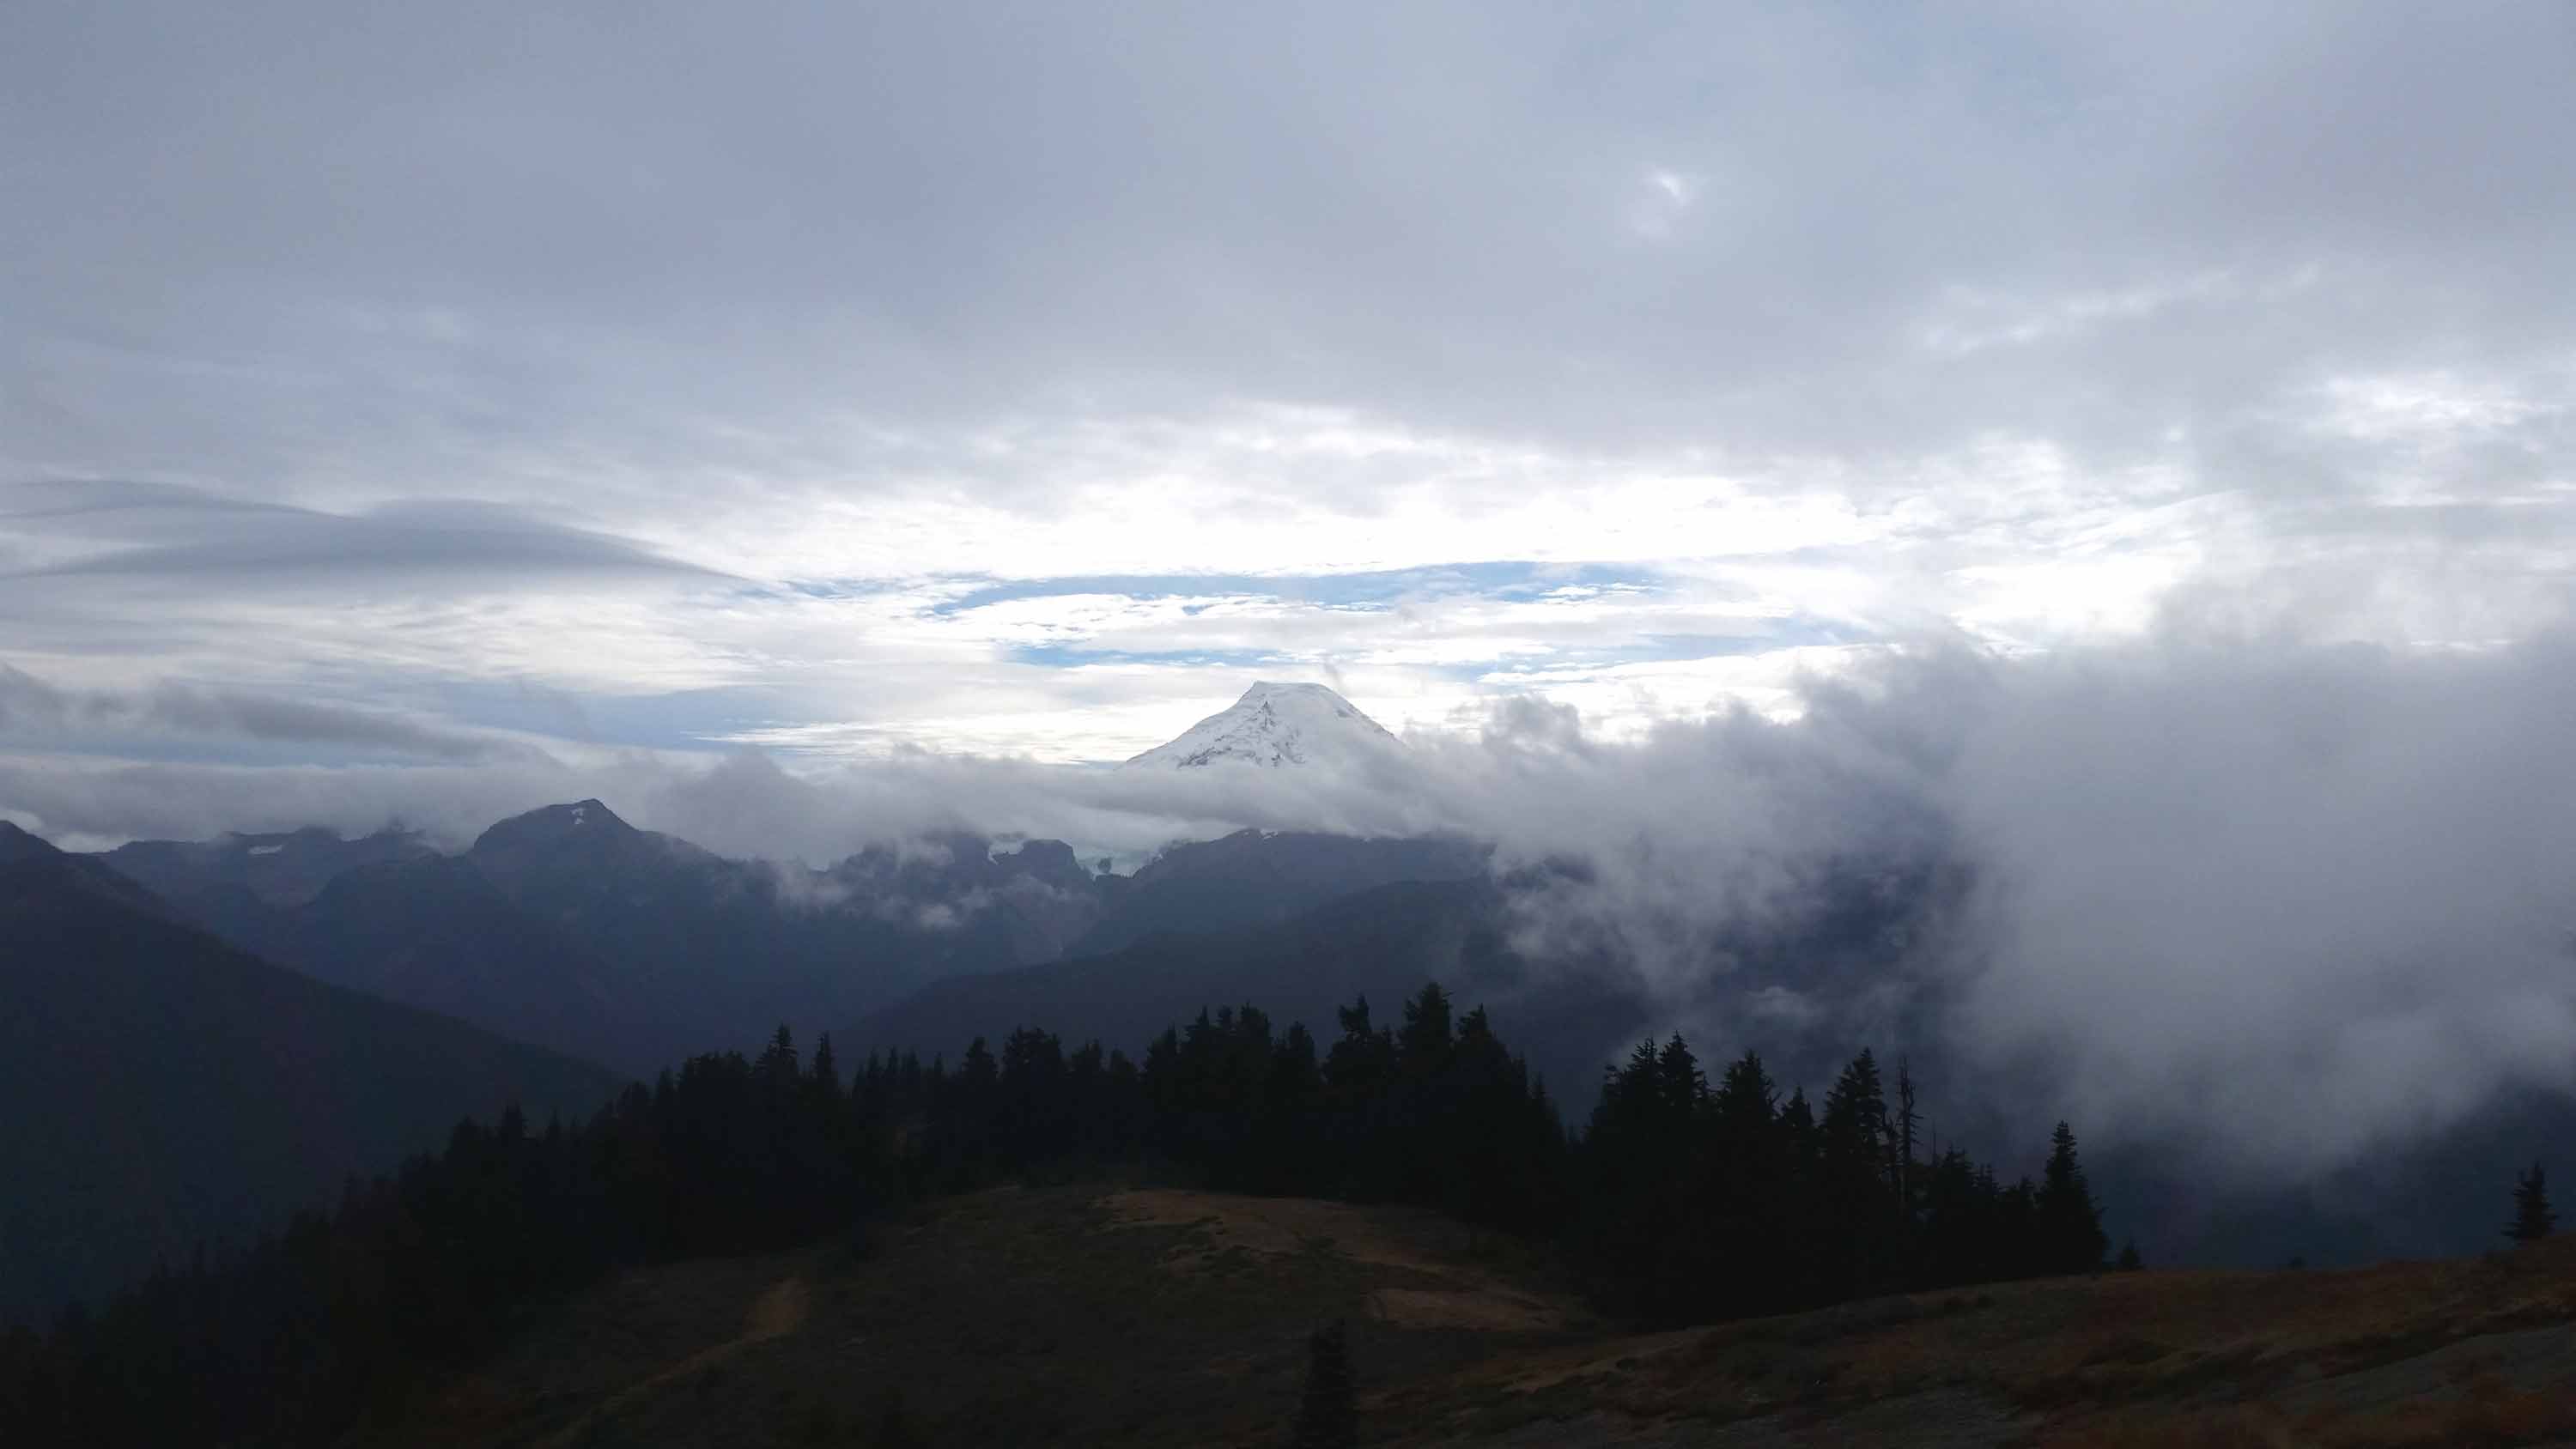 View of Mount Baker from Church Mountain